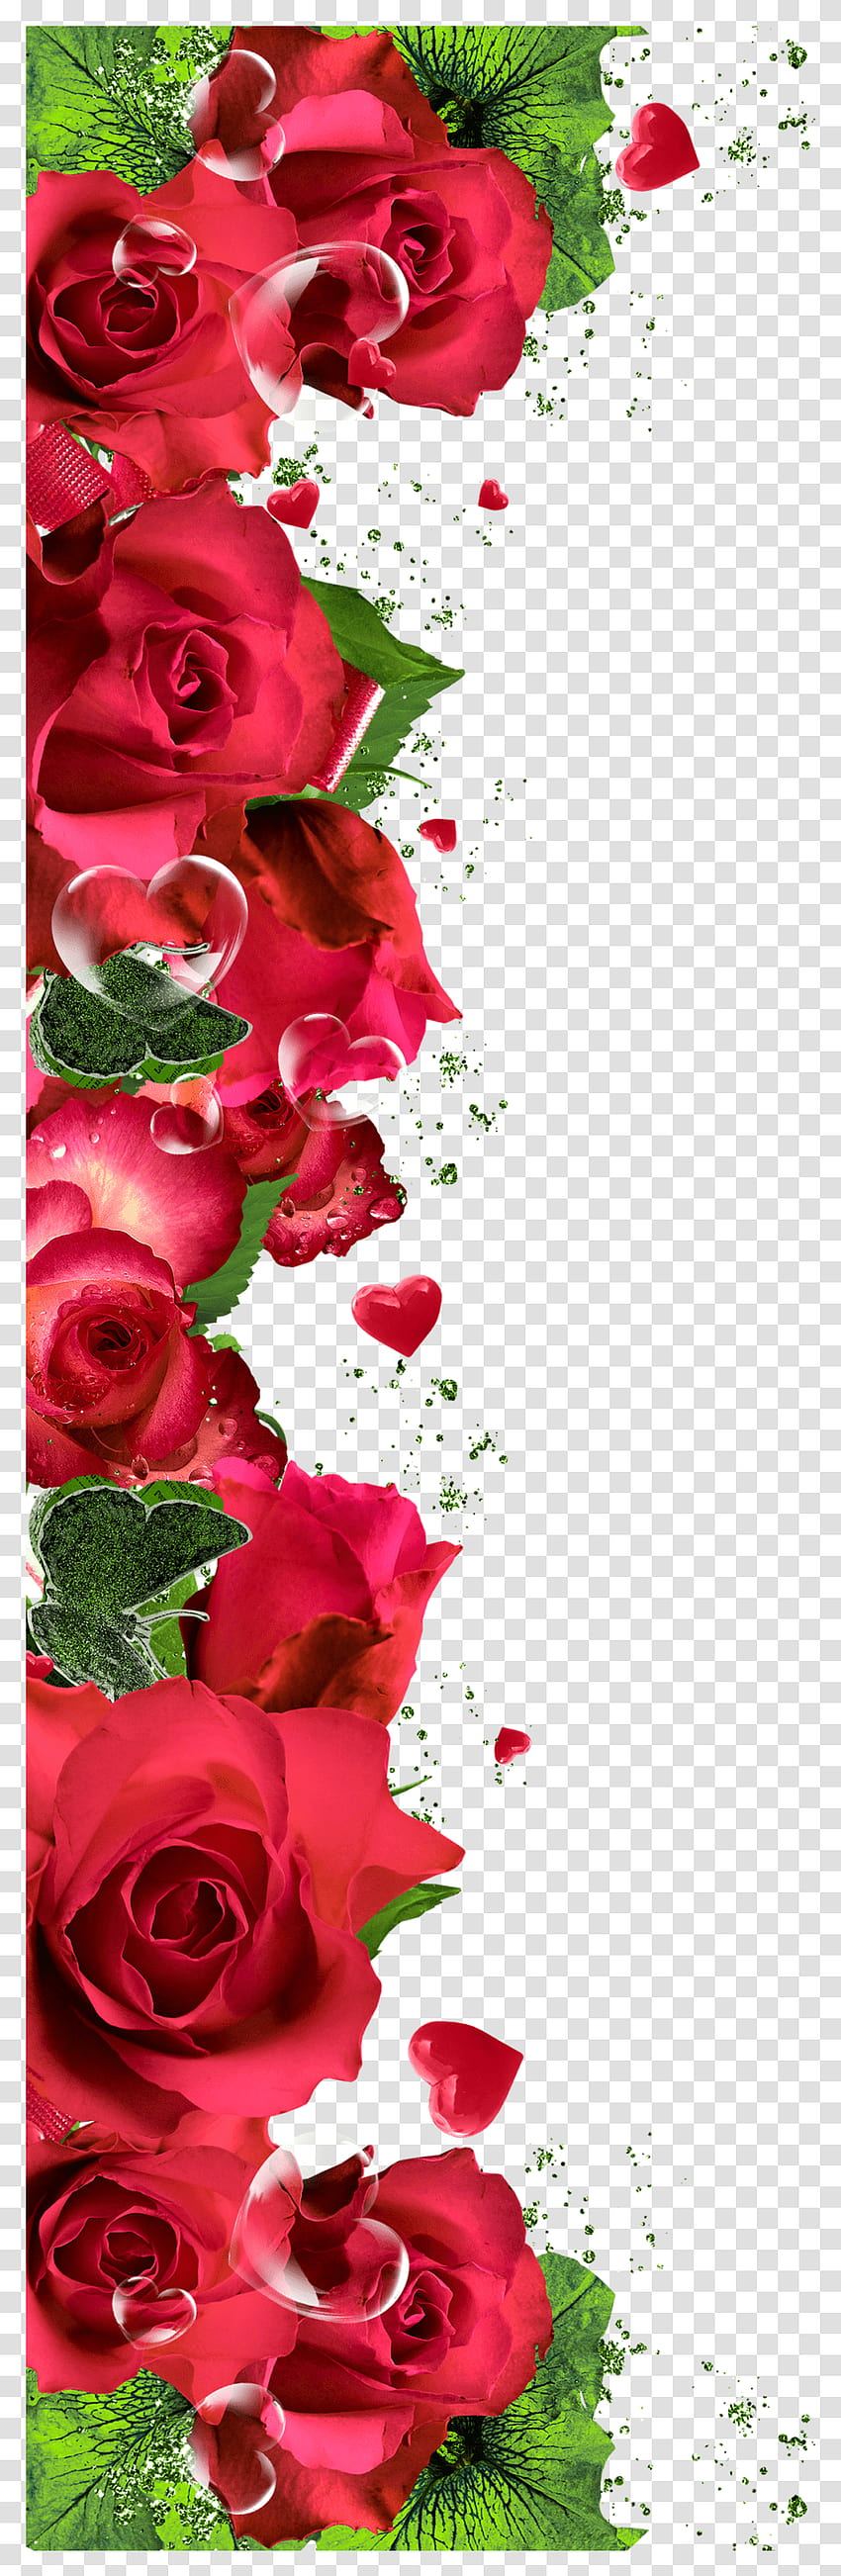 Patterns Backgrounds Iphone Rose Flower Borders Transparent Png – Pngset, rose plant HD phone wallpaper